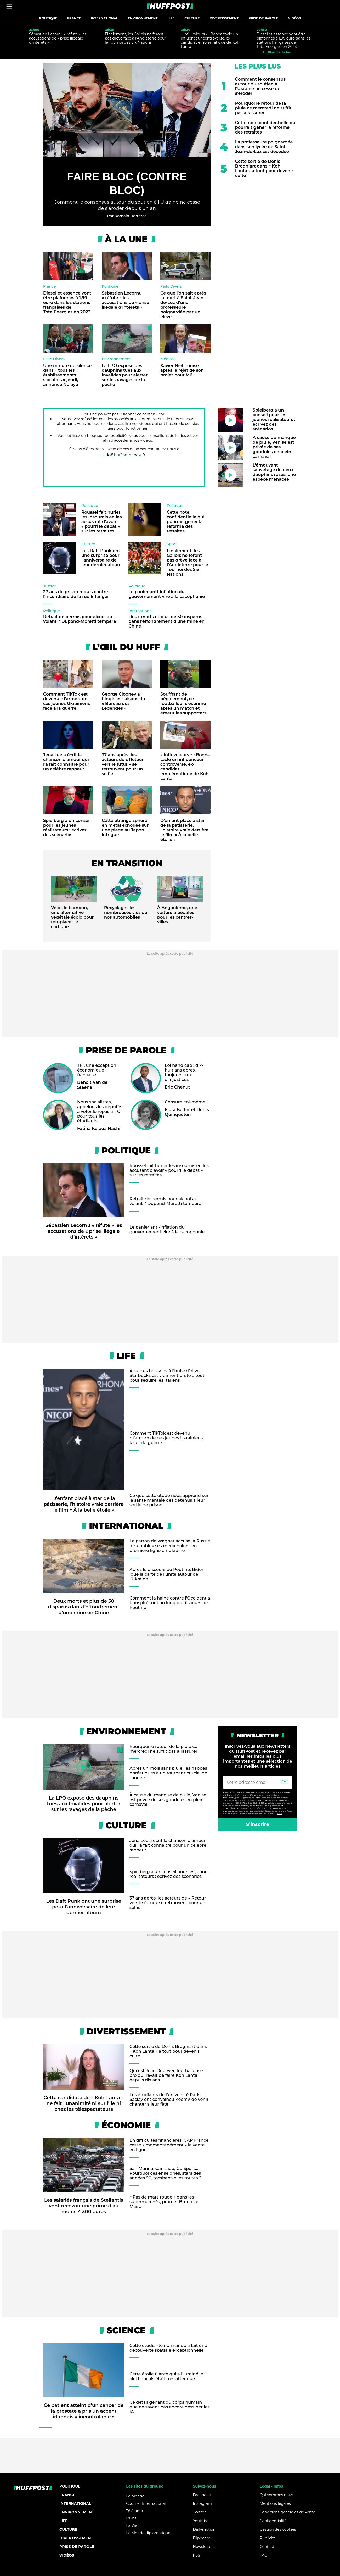 Le Huffington Post at 2023-02-23 00:22:10+01:00 local time